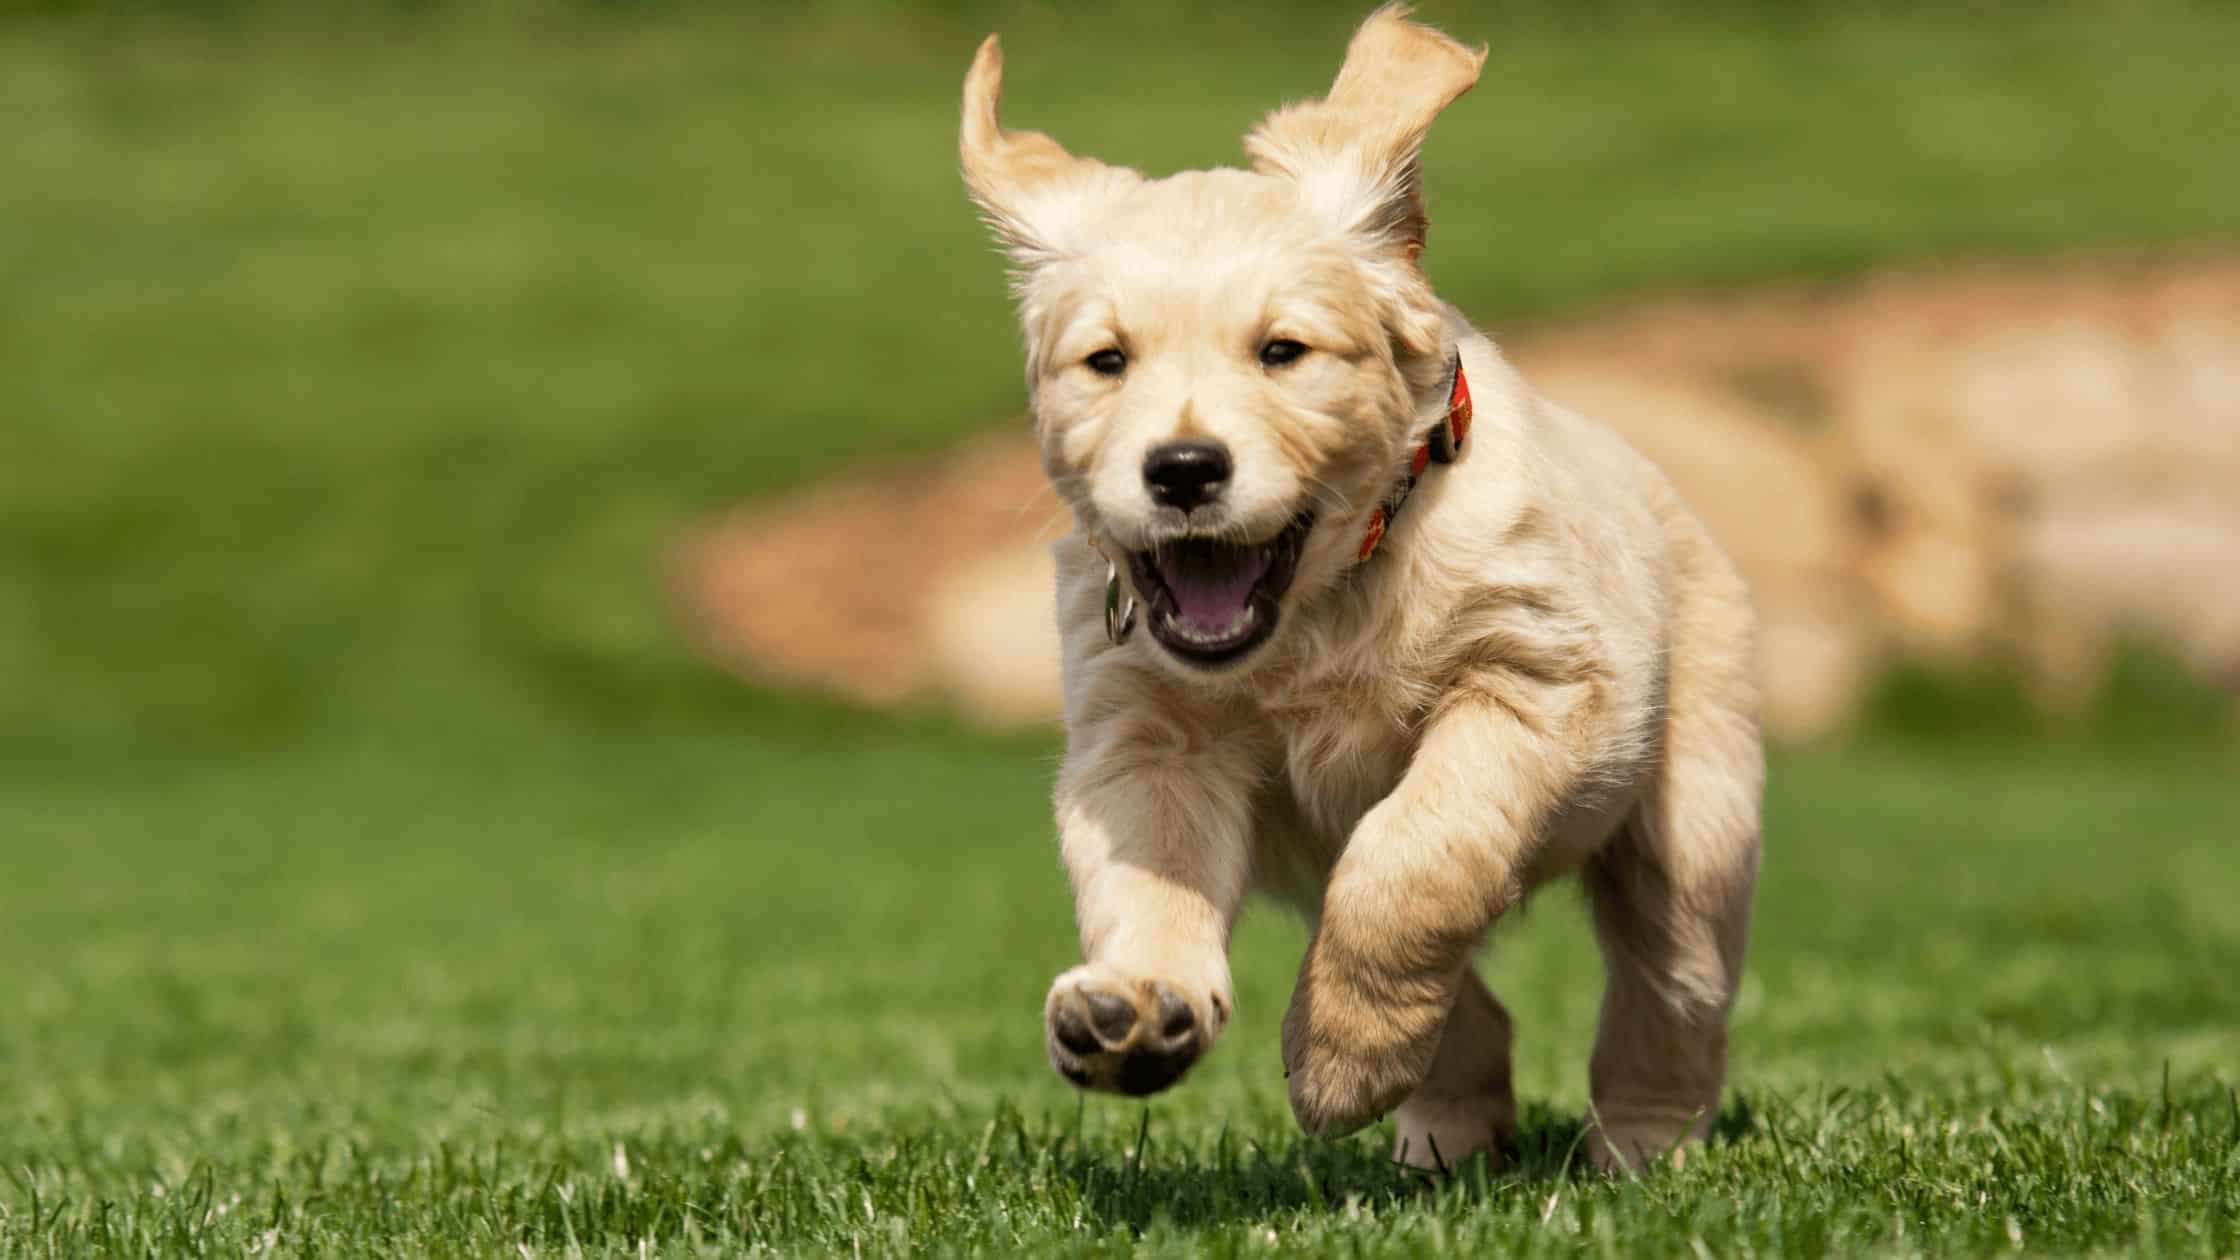 Puppy Development Stages: A Comprehensive Guide to Your Puppy’s Growth